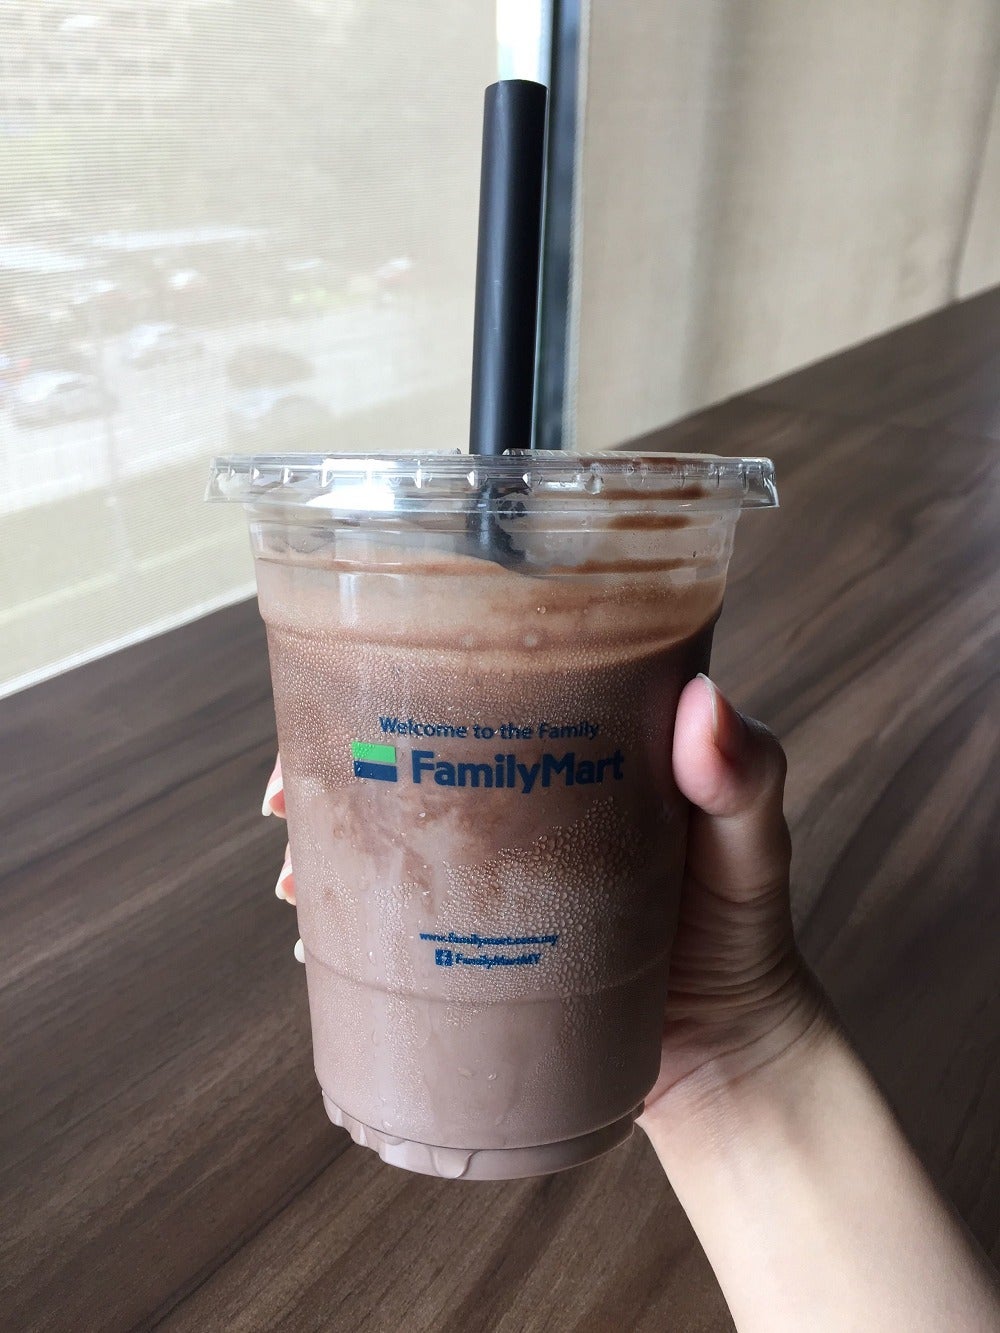 FamilyMart Malaysia Just Launched New Sofuto Flavour, Belgian Dark Chocolate & Here's Our Verdict! - WORLD OF BUZZ 3